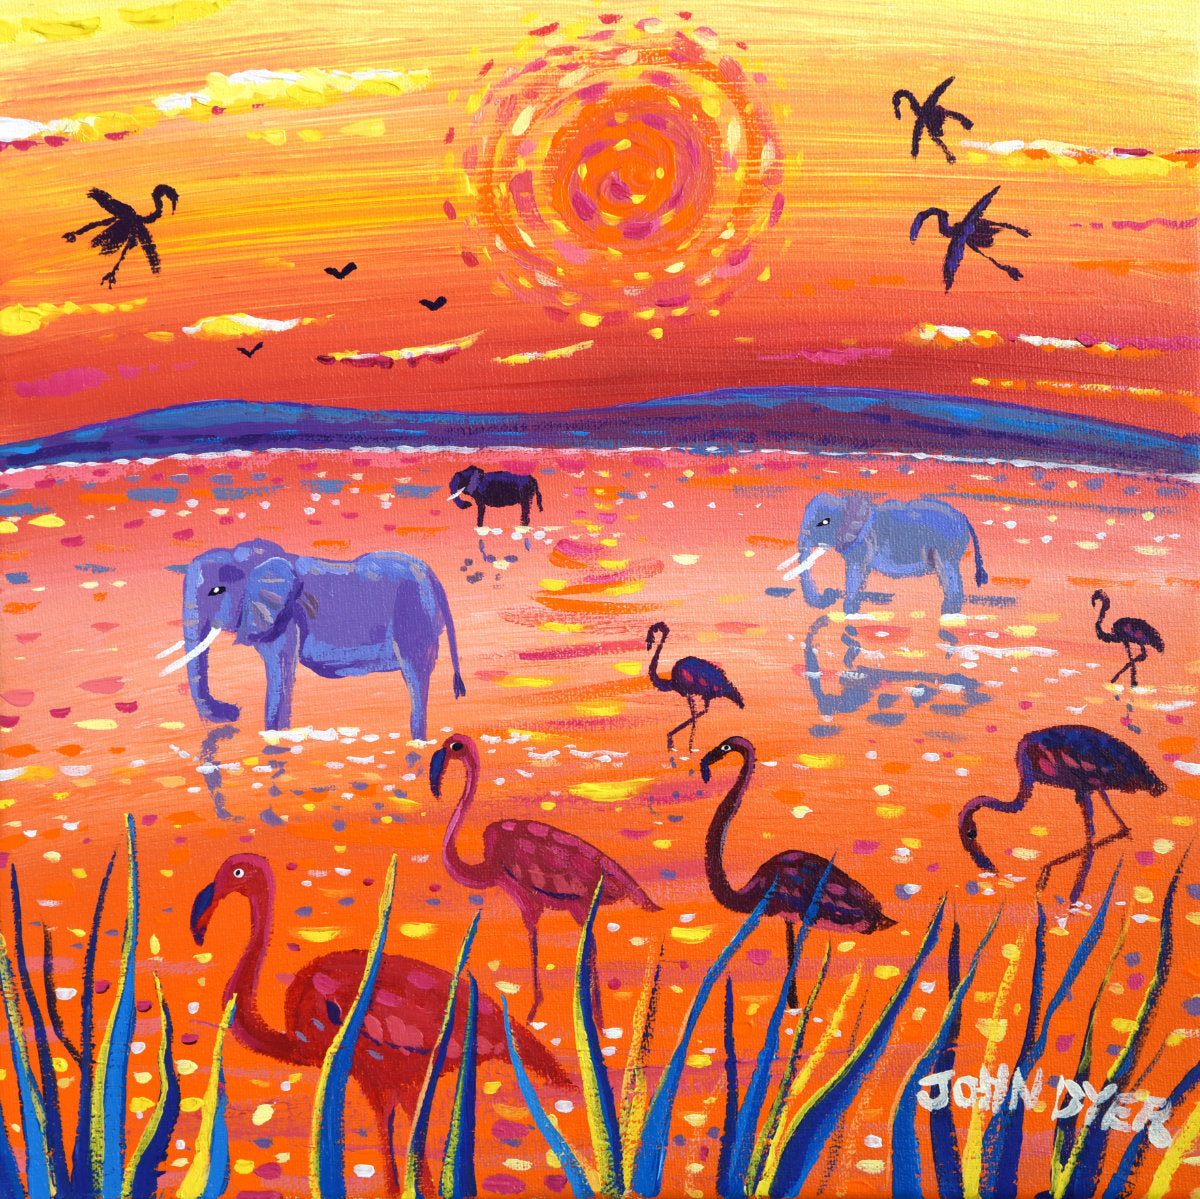 &#39;African Flamingo Sunset, Kenya&#39;, 12x12 inches acrylic on canvas. Paintings of Africa by British Artist John Dyer.